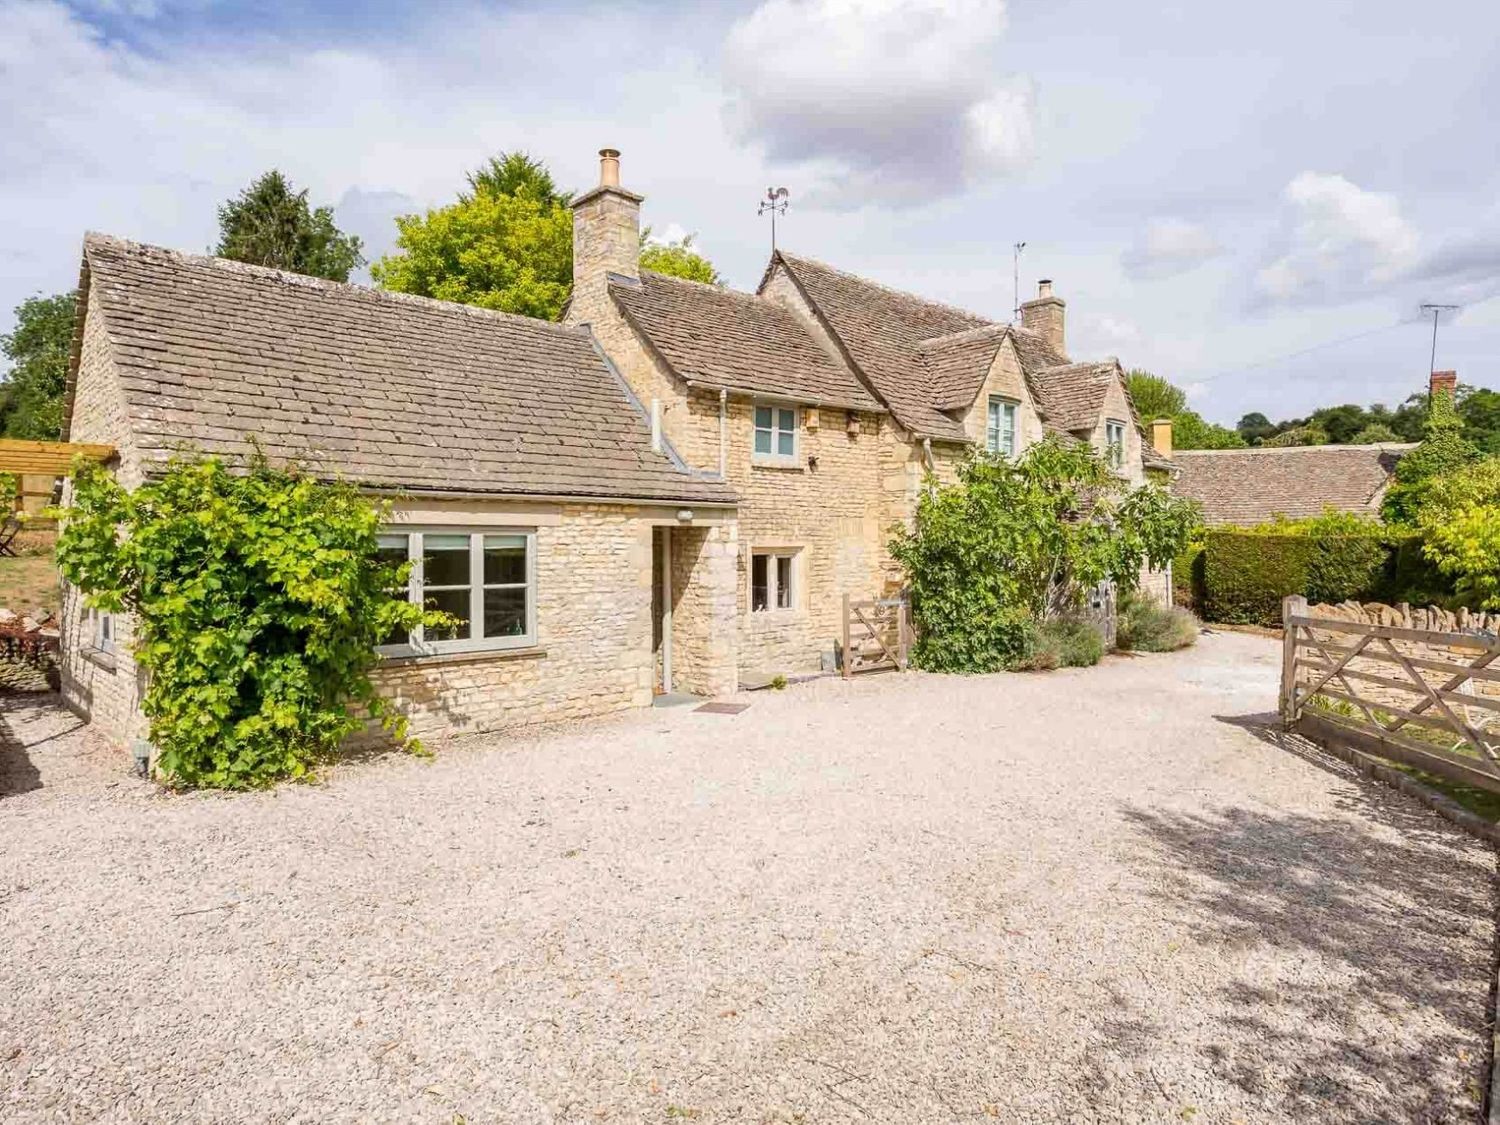 Willow Tree Cottage - Cotswolds - 1091275 - photo 1